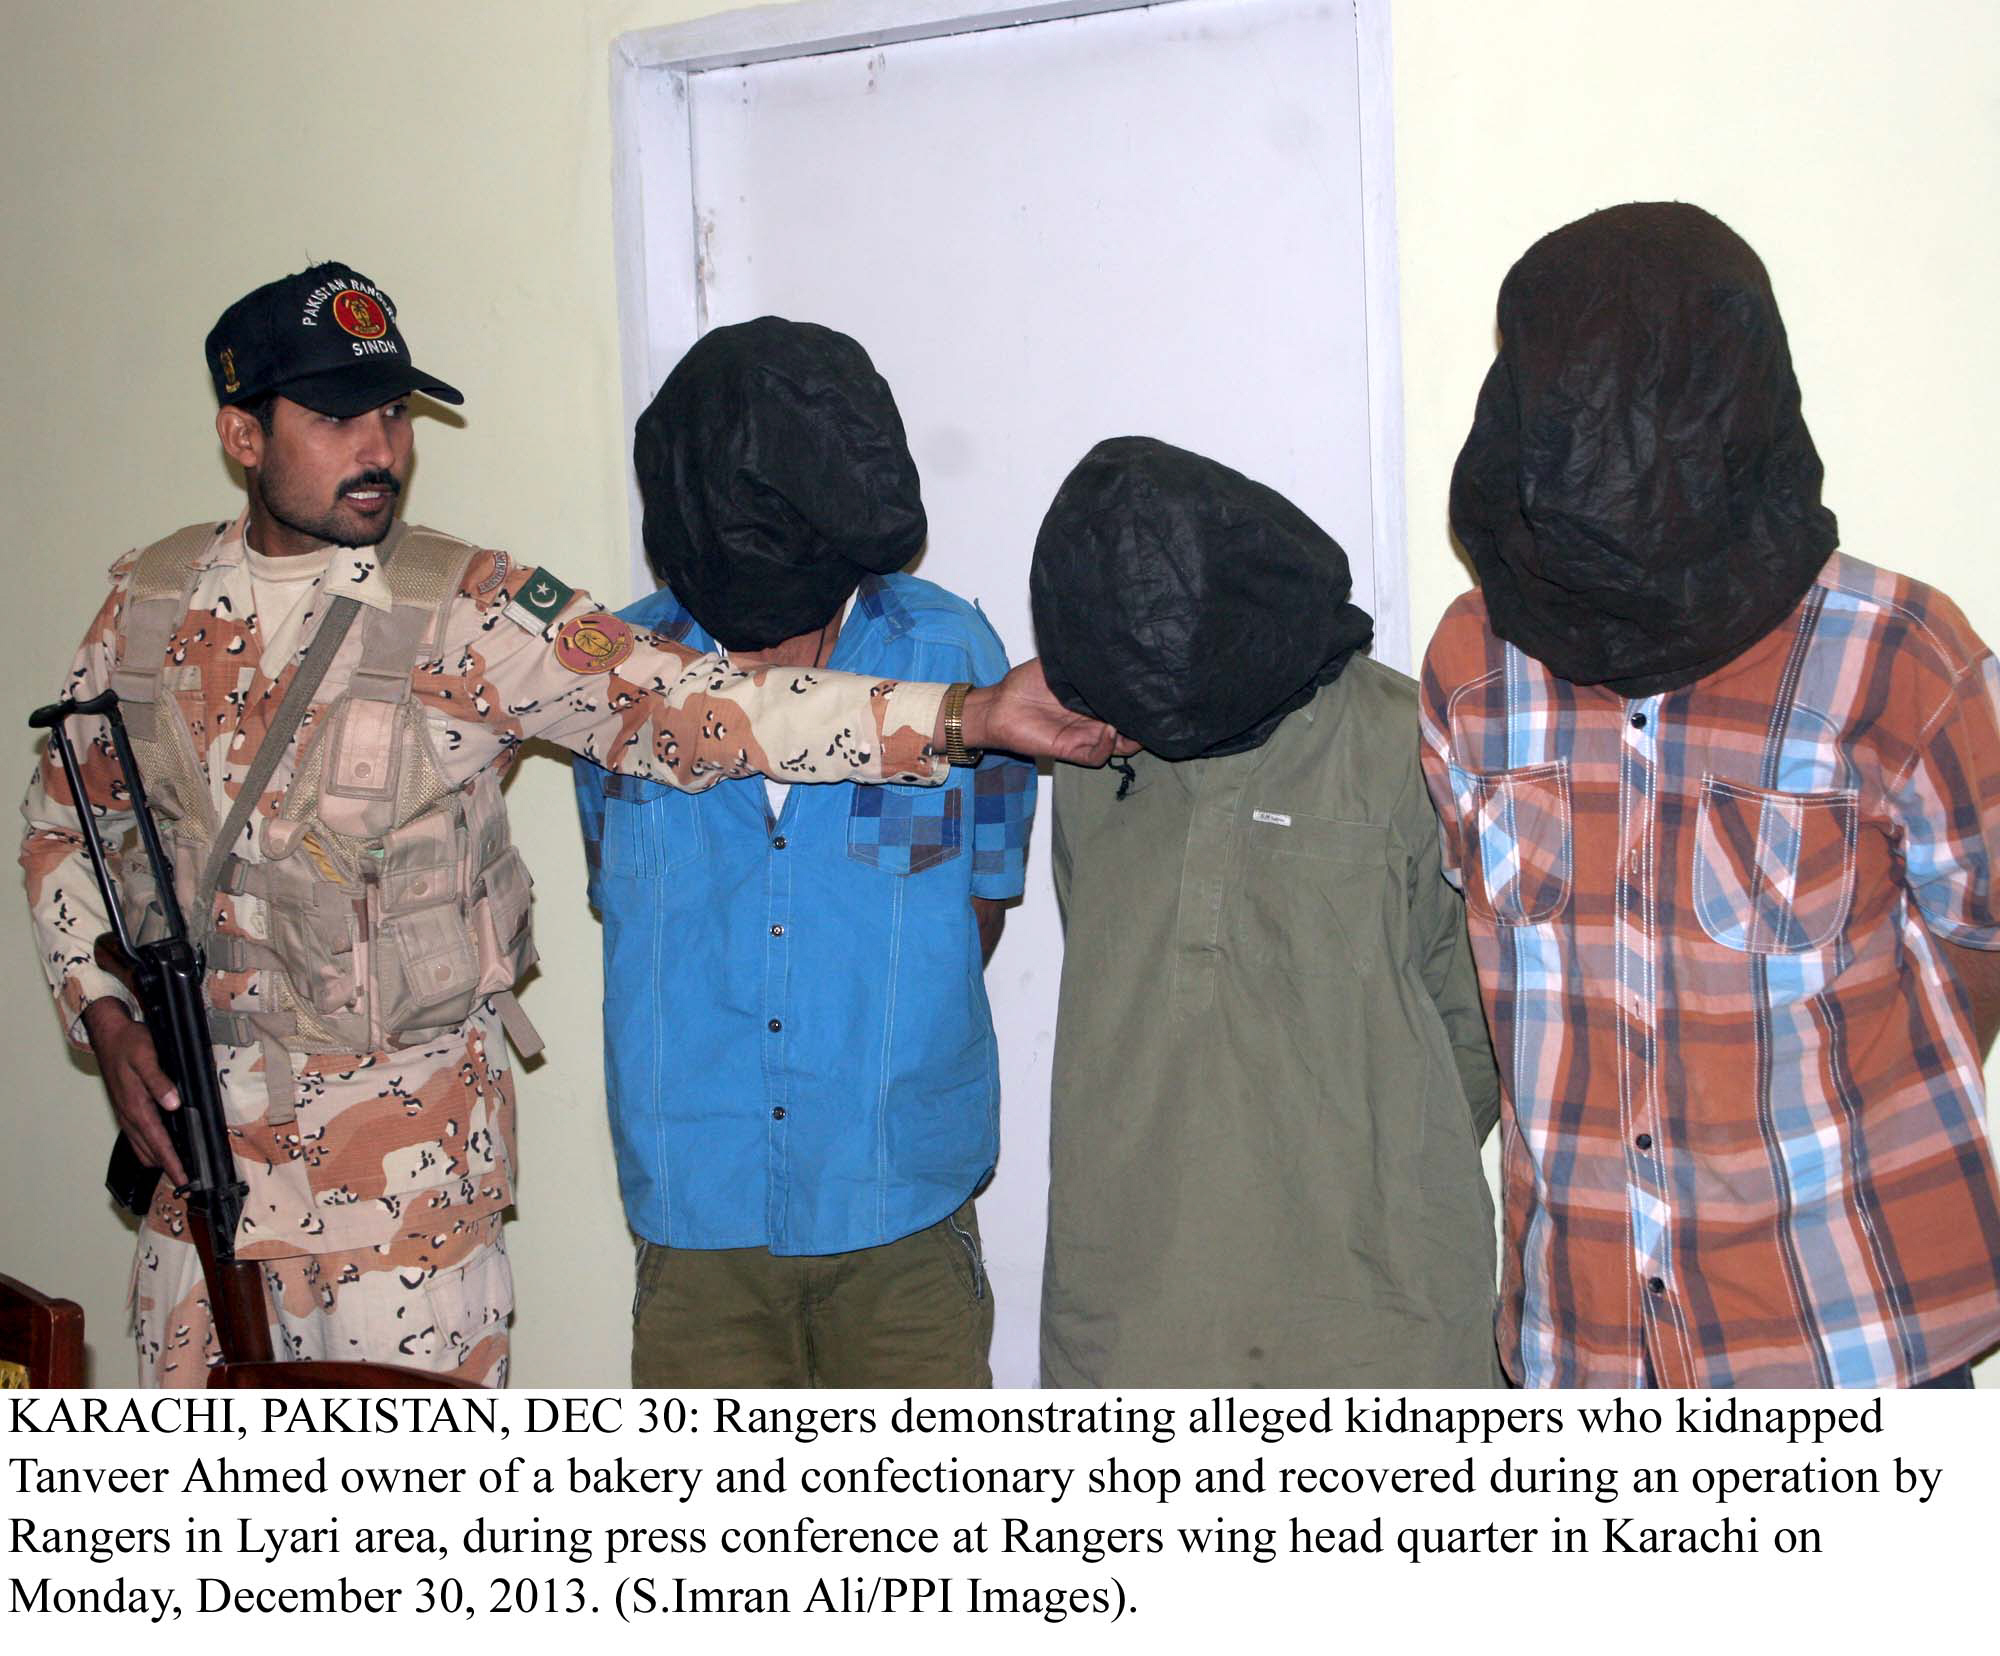 islamabad police arrested 11 outlaws including three drug peddlers and a proclaimed offender wanted by police photo ppi